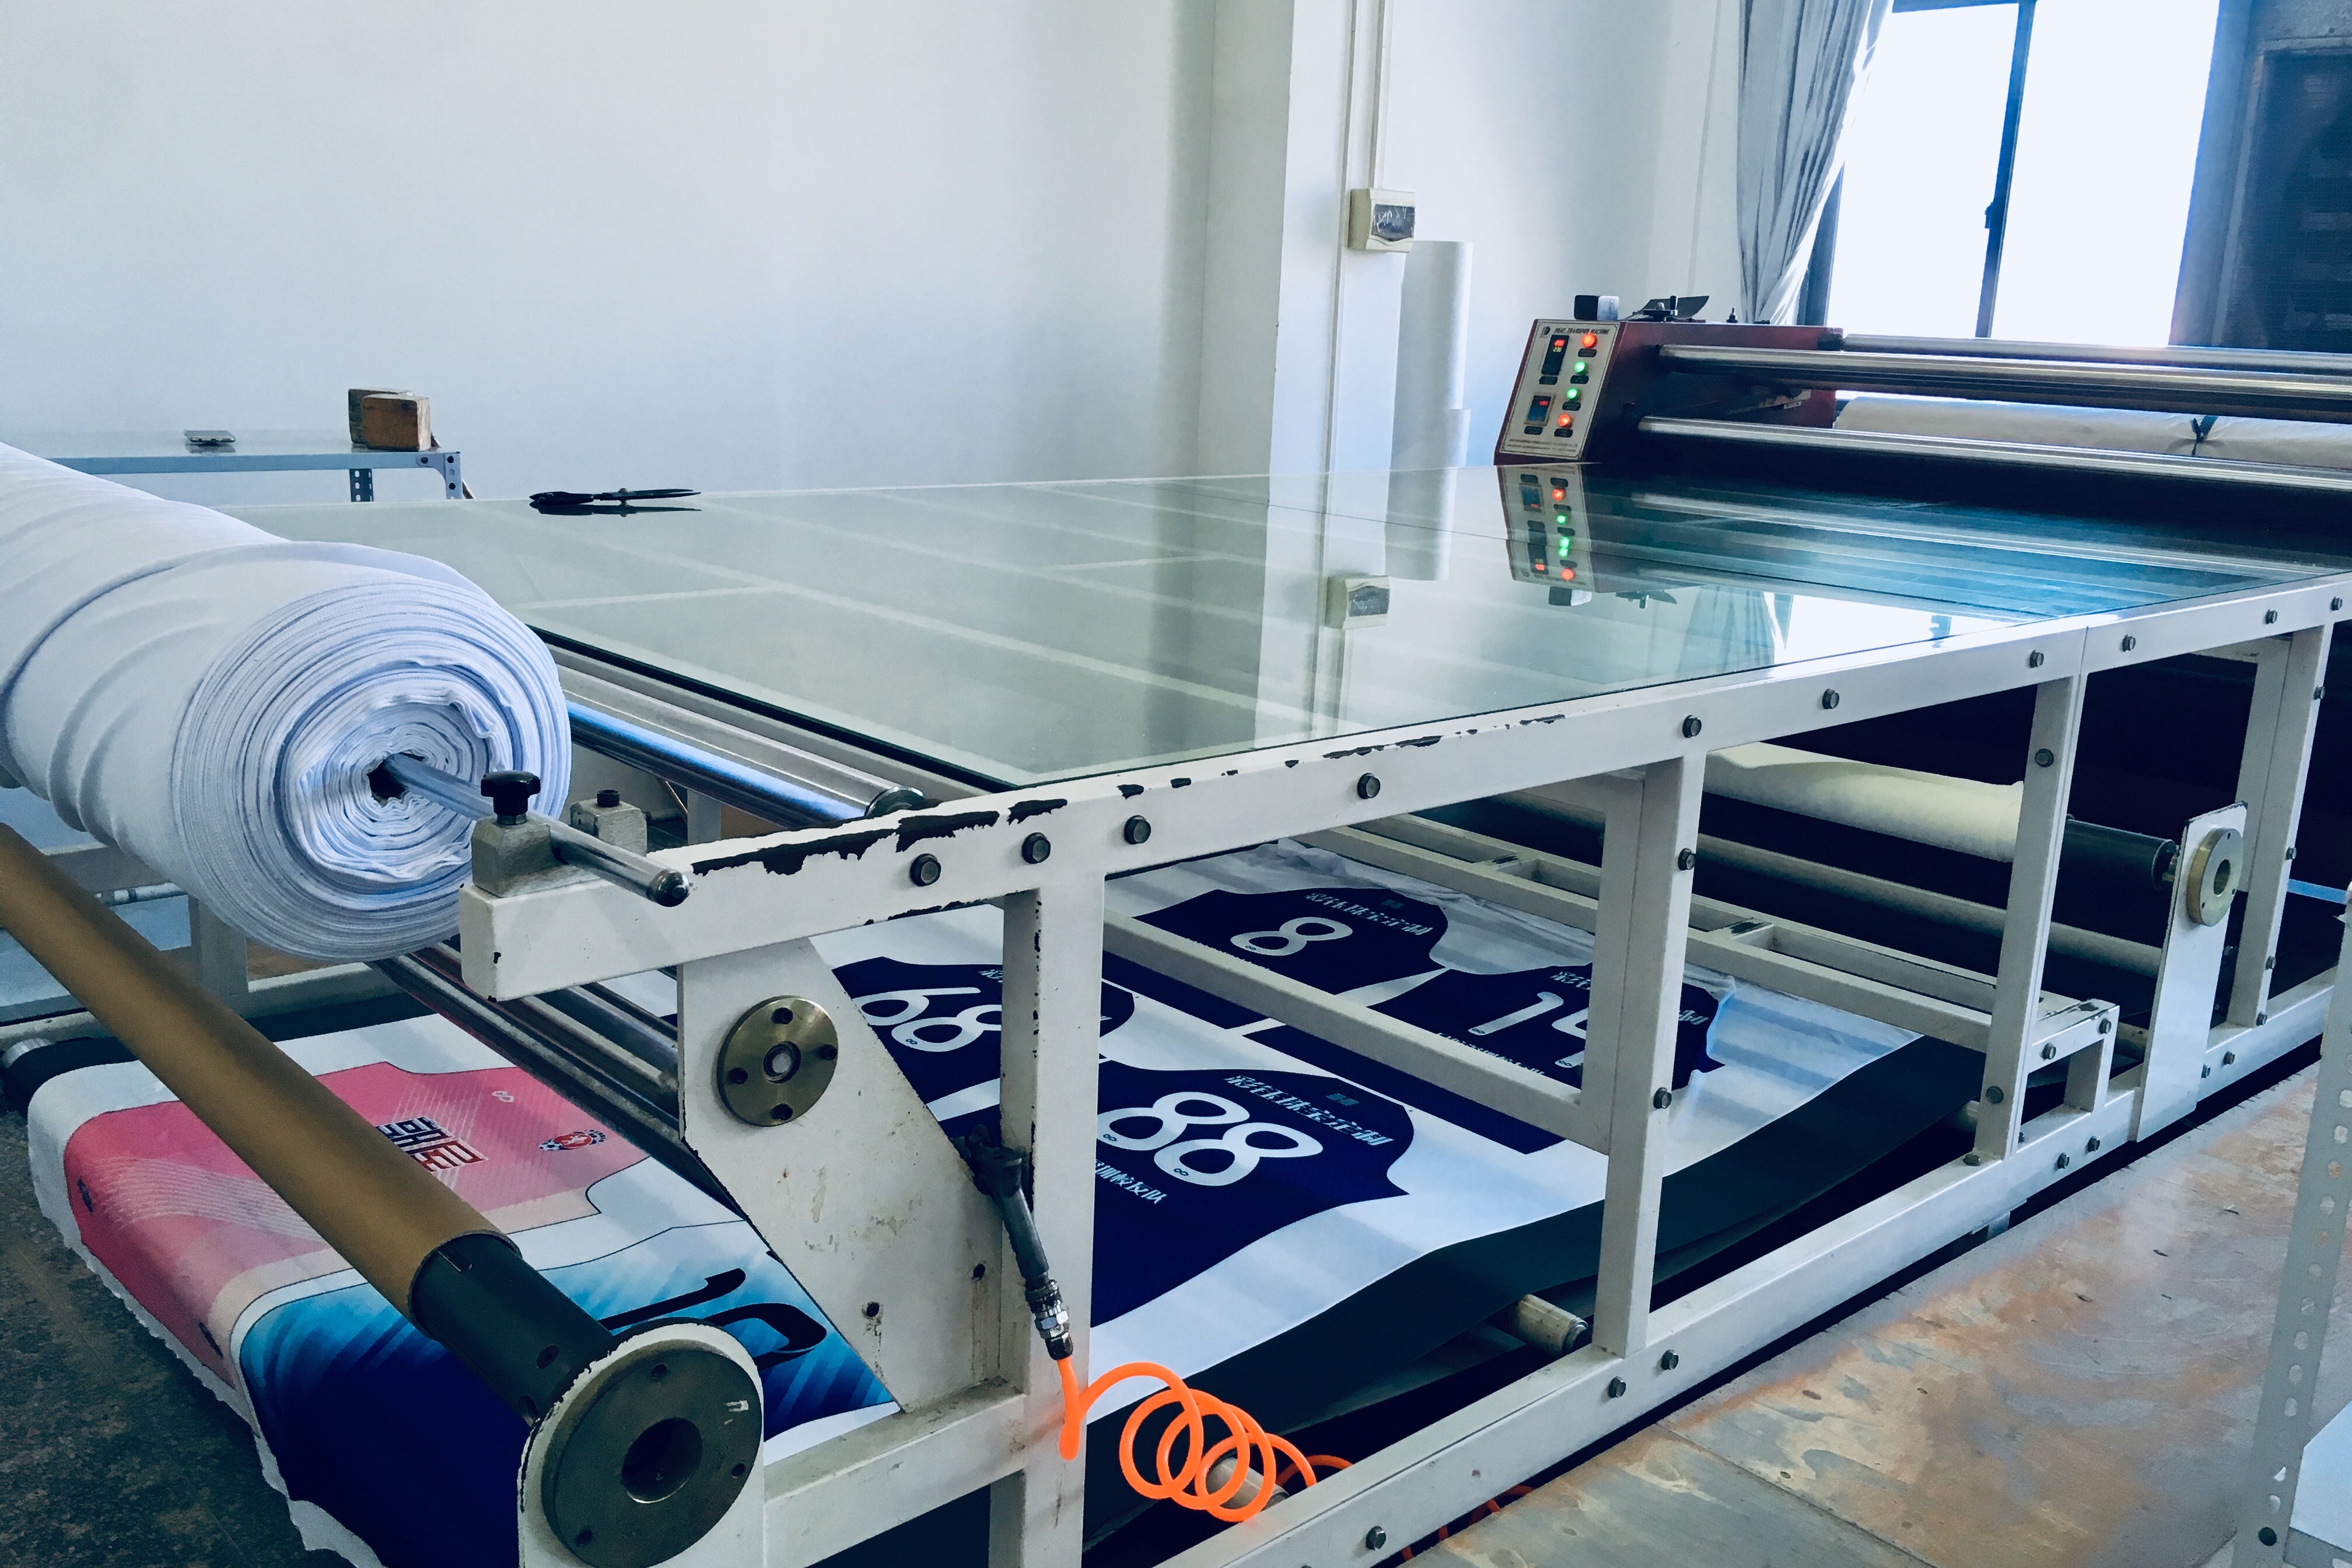 Sublimation printing is a printing technique that transfers a design into a material or fabric using ink and heat. This form of printing is special in that it allows whole garment prints — designs that go seam-to-seam.